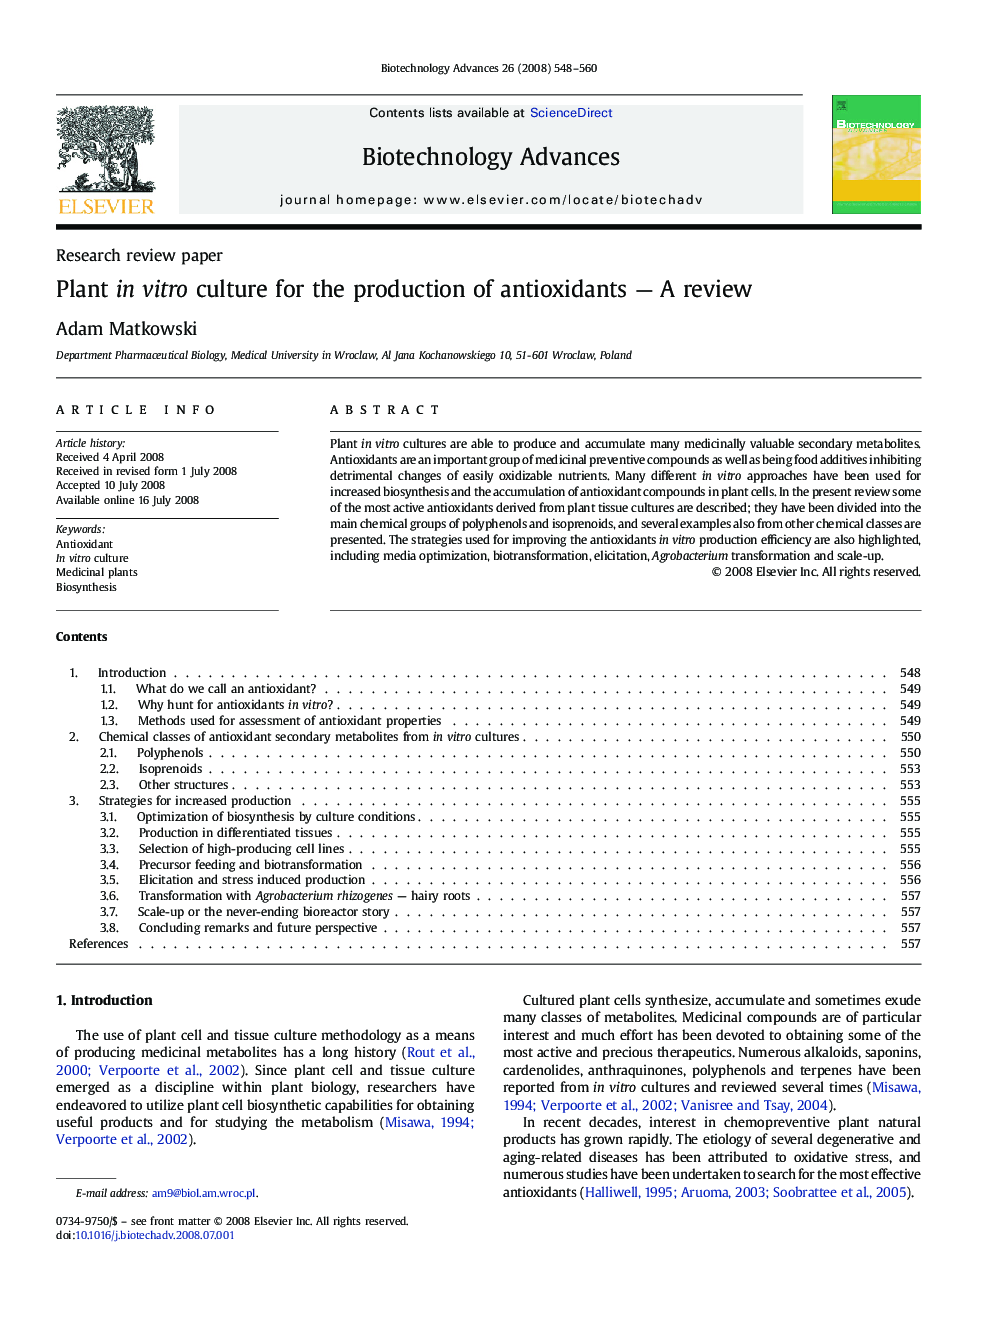 Plant in vitro culture for the production of antioxidants — A review